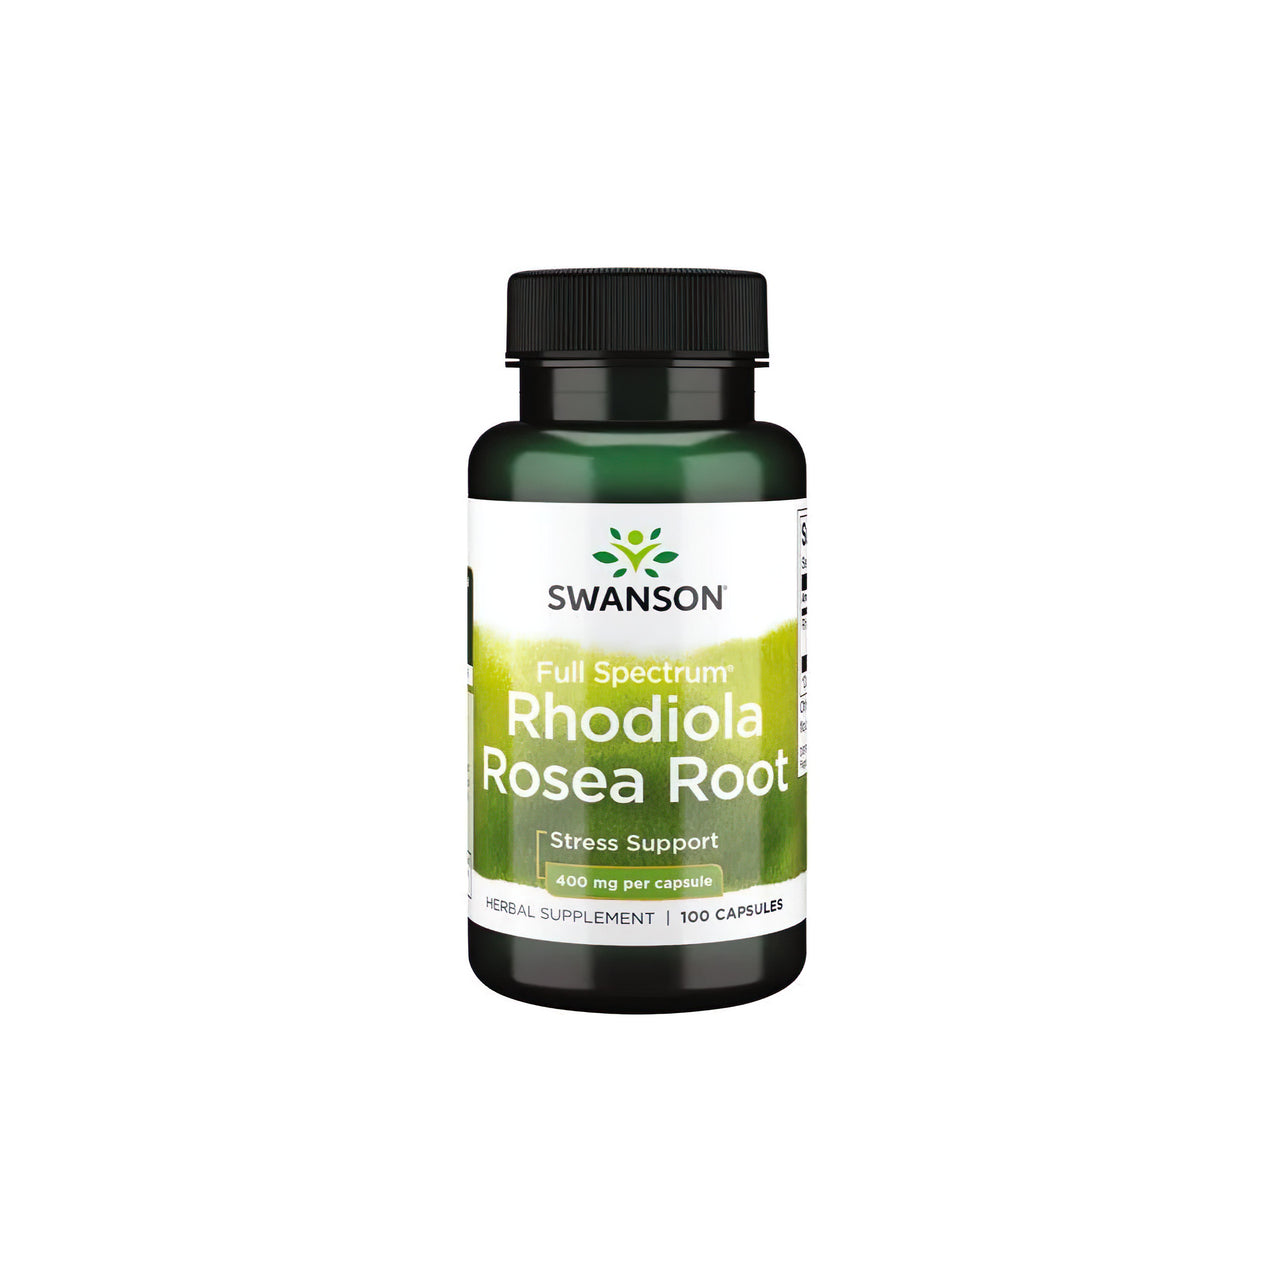 Swanson Rhodiola Rosea Root 400 mg 100 Capsules, an adaptogenic herb known to combat stress.